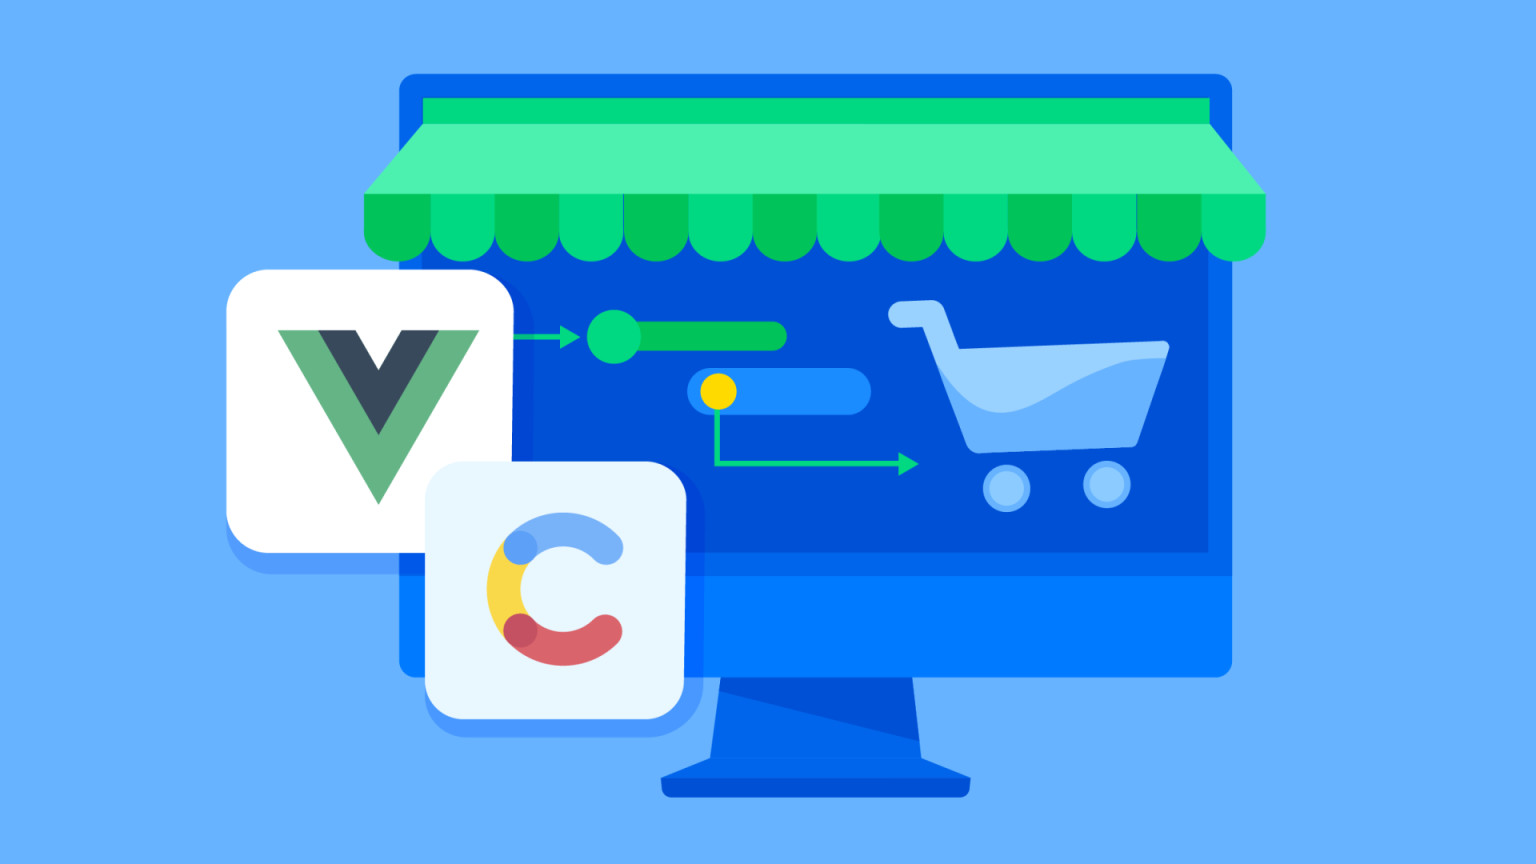 A hands-on guide for using Contentful with Vue. Contains code samples and screenshots of everything needed to build an ecommerce site with Contentful with Vue.